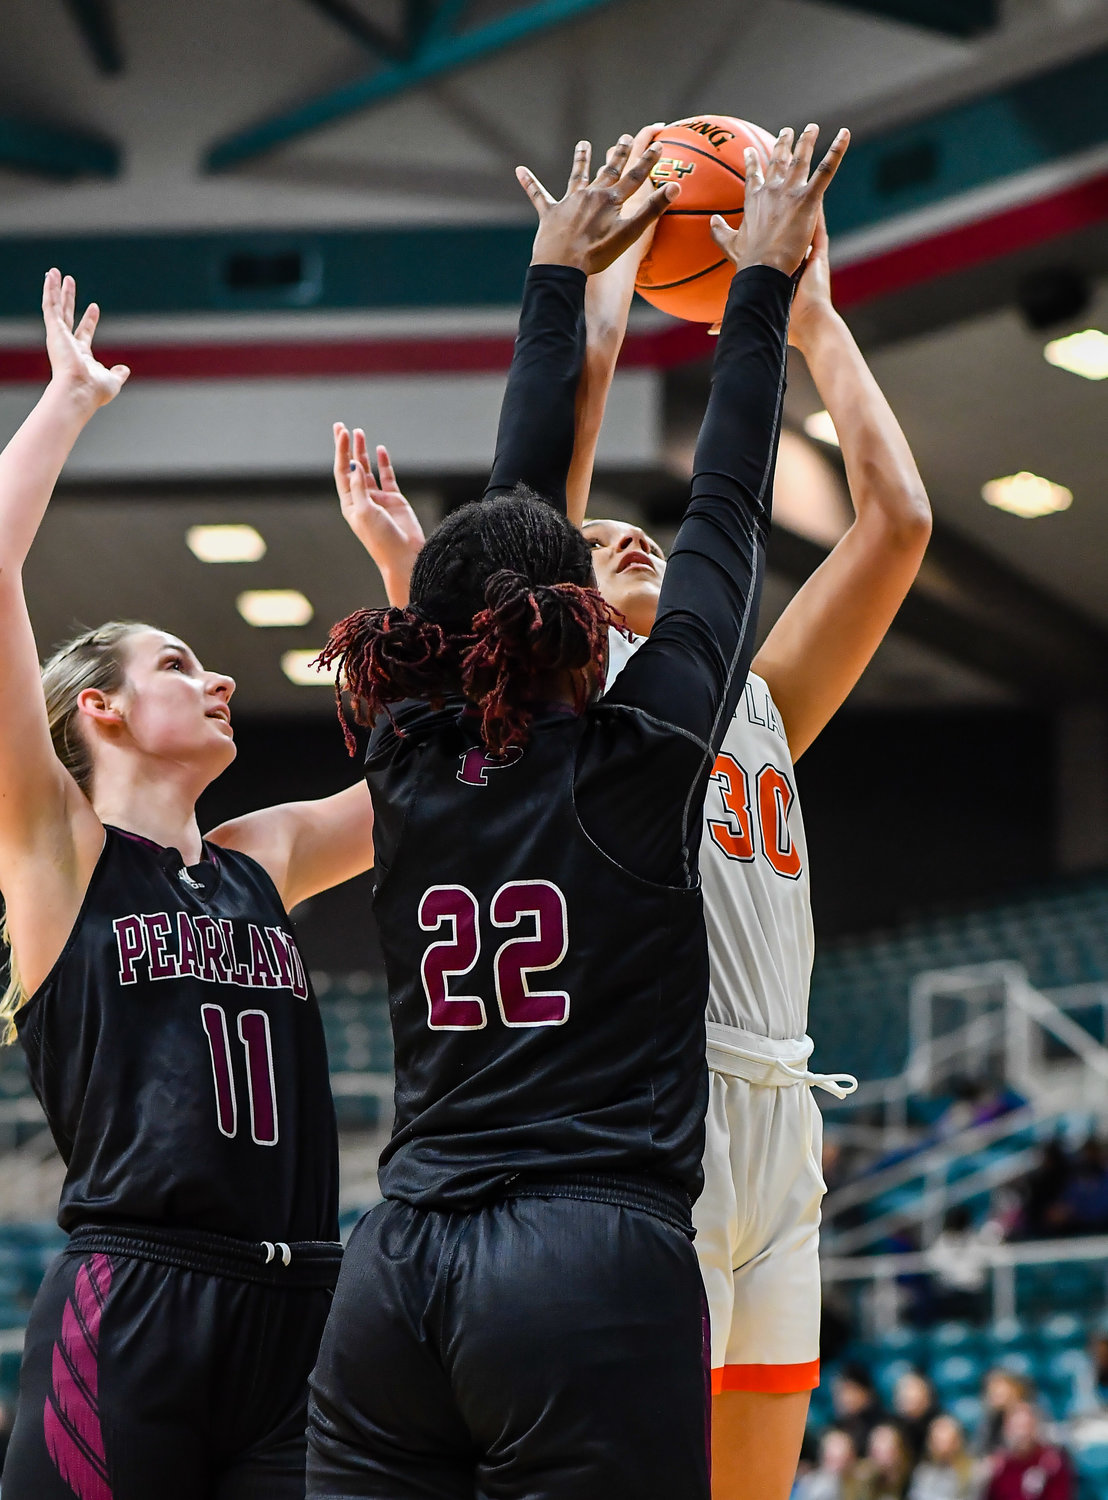 Katy Tx. Feb 25, 2022:  Seven Lakes Justice Carlton #30 goes up for the shot guarded by Pearlands Rylee Grays #22 during the Regional SemiFinal playoff game, Seven Lakes vs Pearland at the Merrell Center. (Photo by Mark Goodman / Katy Times)